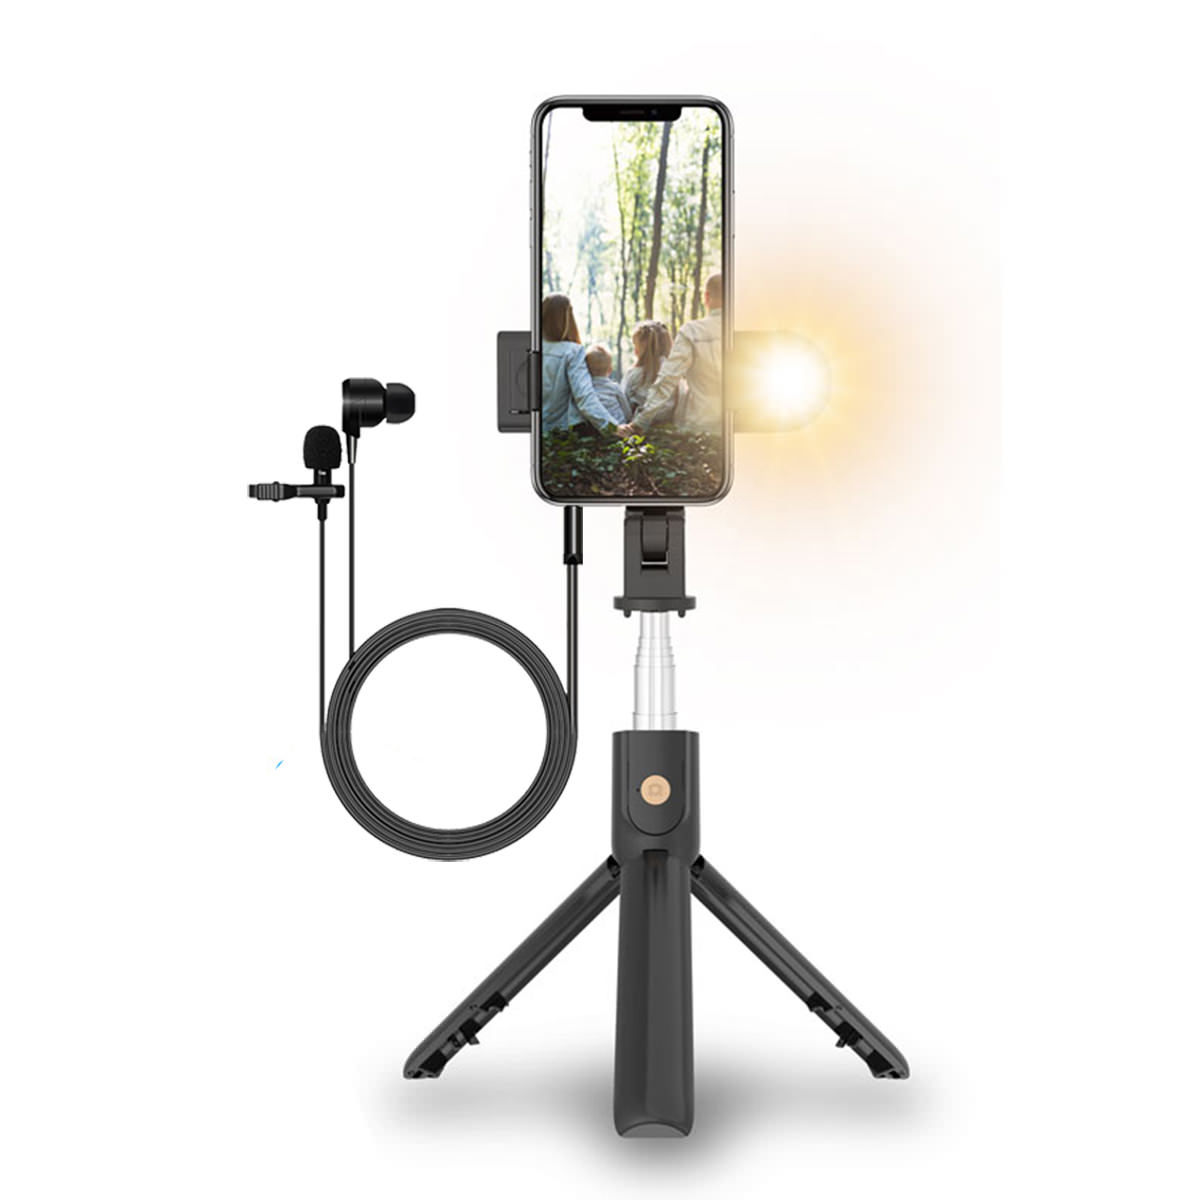 Odds Lydighed Tal til Outdoor Live Streaming Selfie Stick with Microphone and Light, YouTube  Video Recording Tripod, Mobile Phone Live Stream equipment for Facebook  Instagram TikTok On the Go - LenTok Official